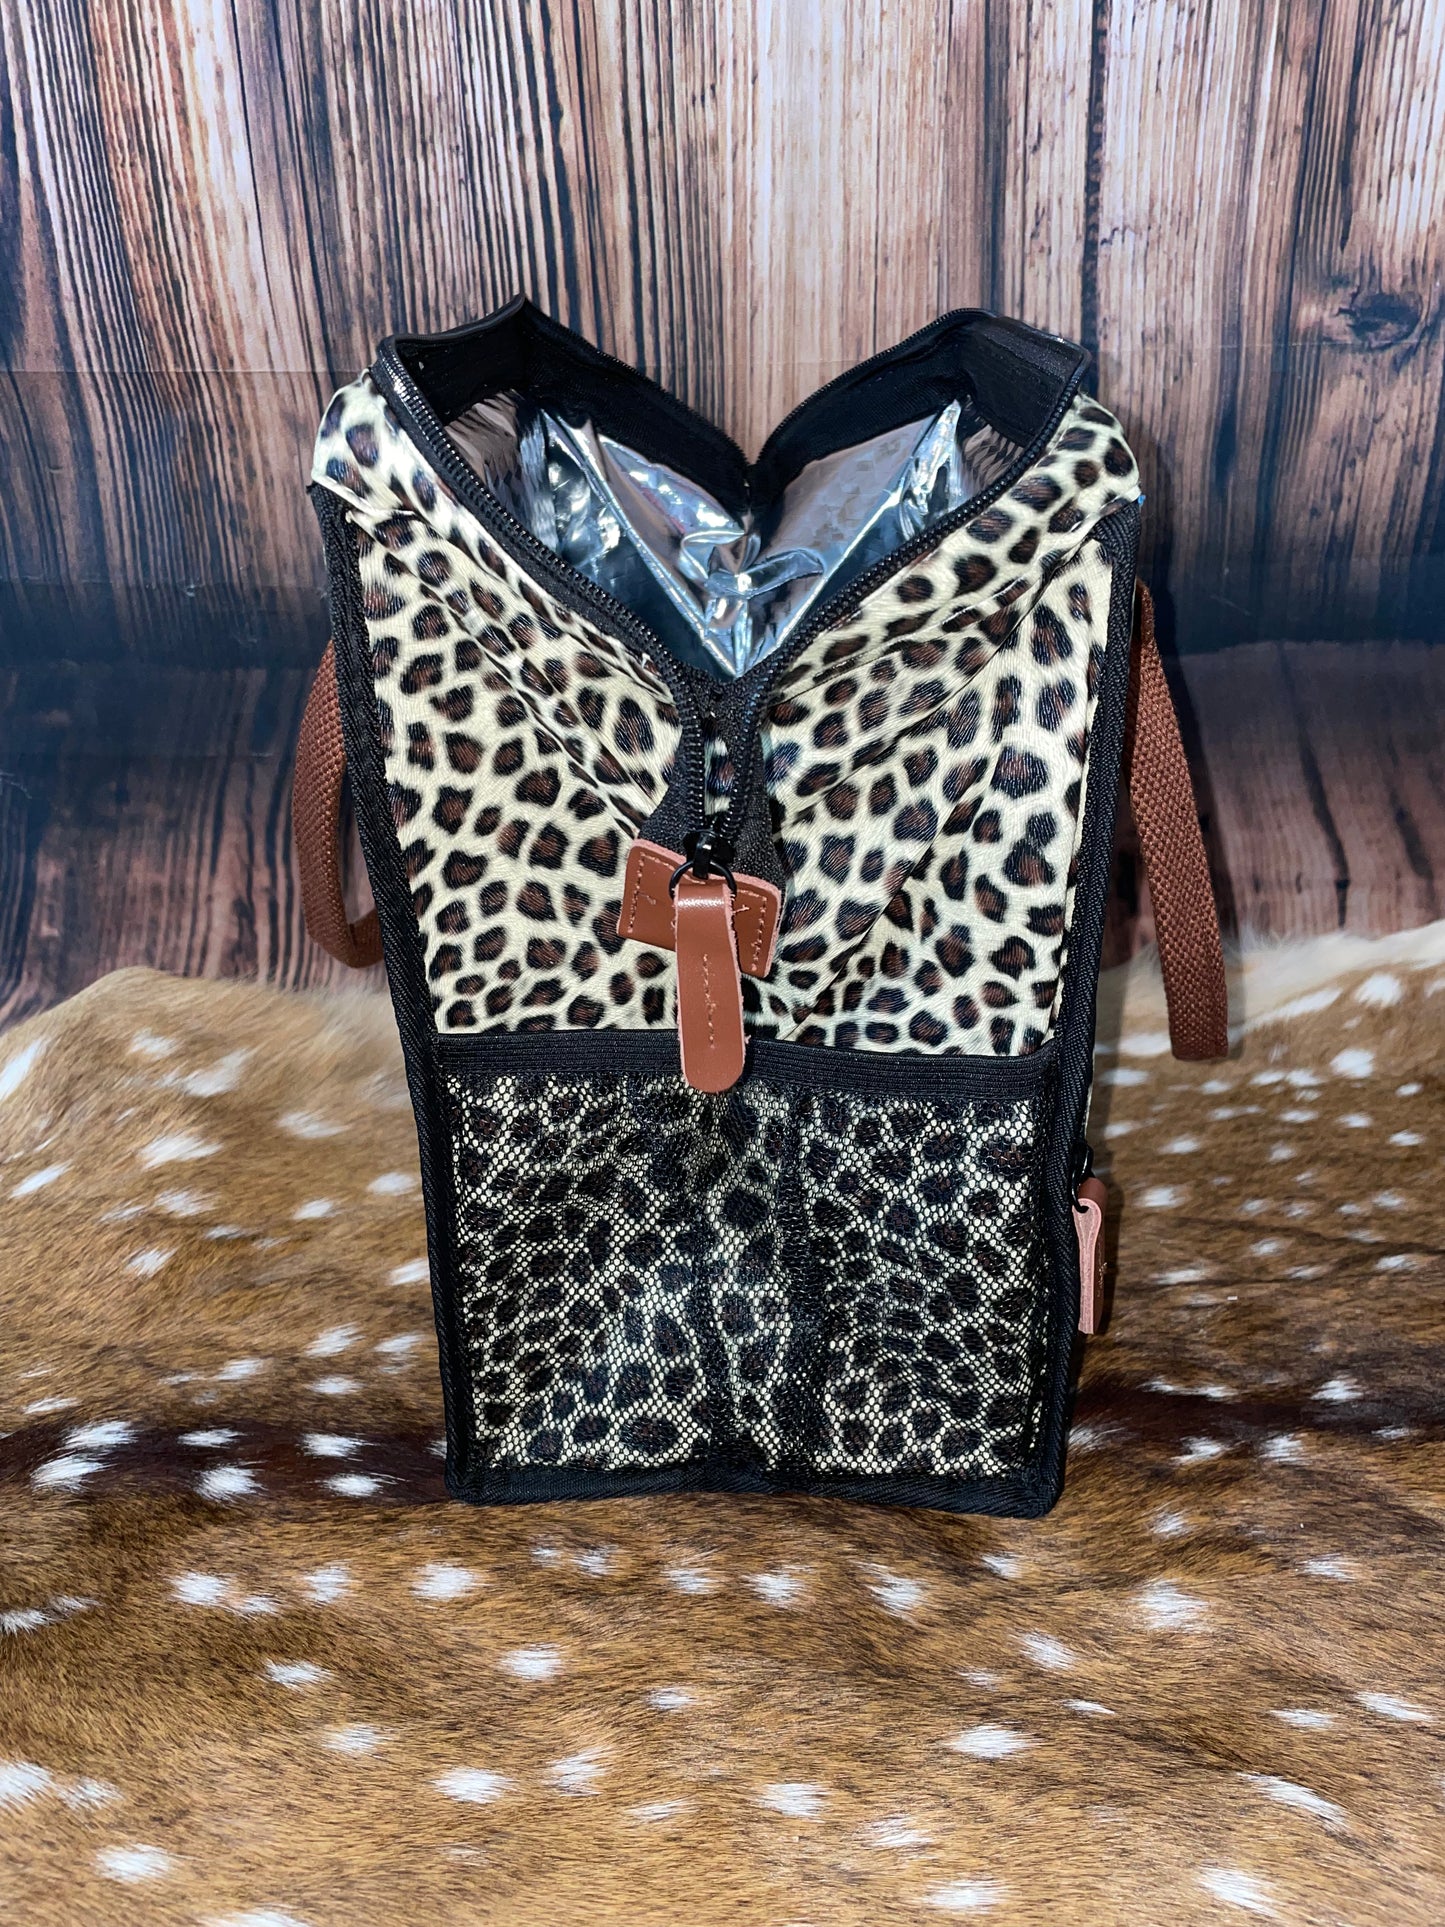 Insulated Lunch Tote - Black Leopard